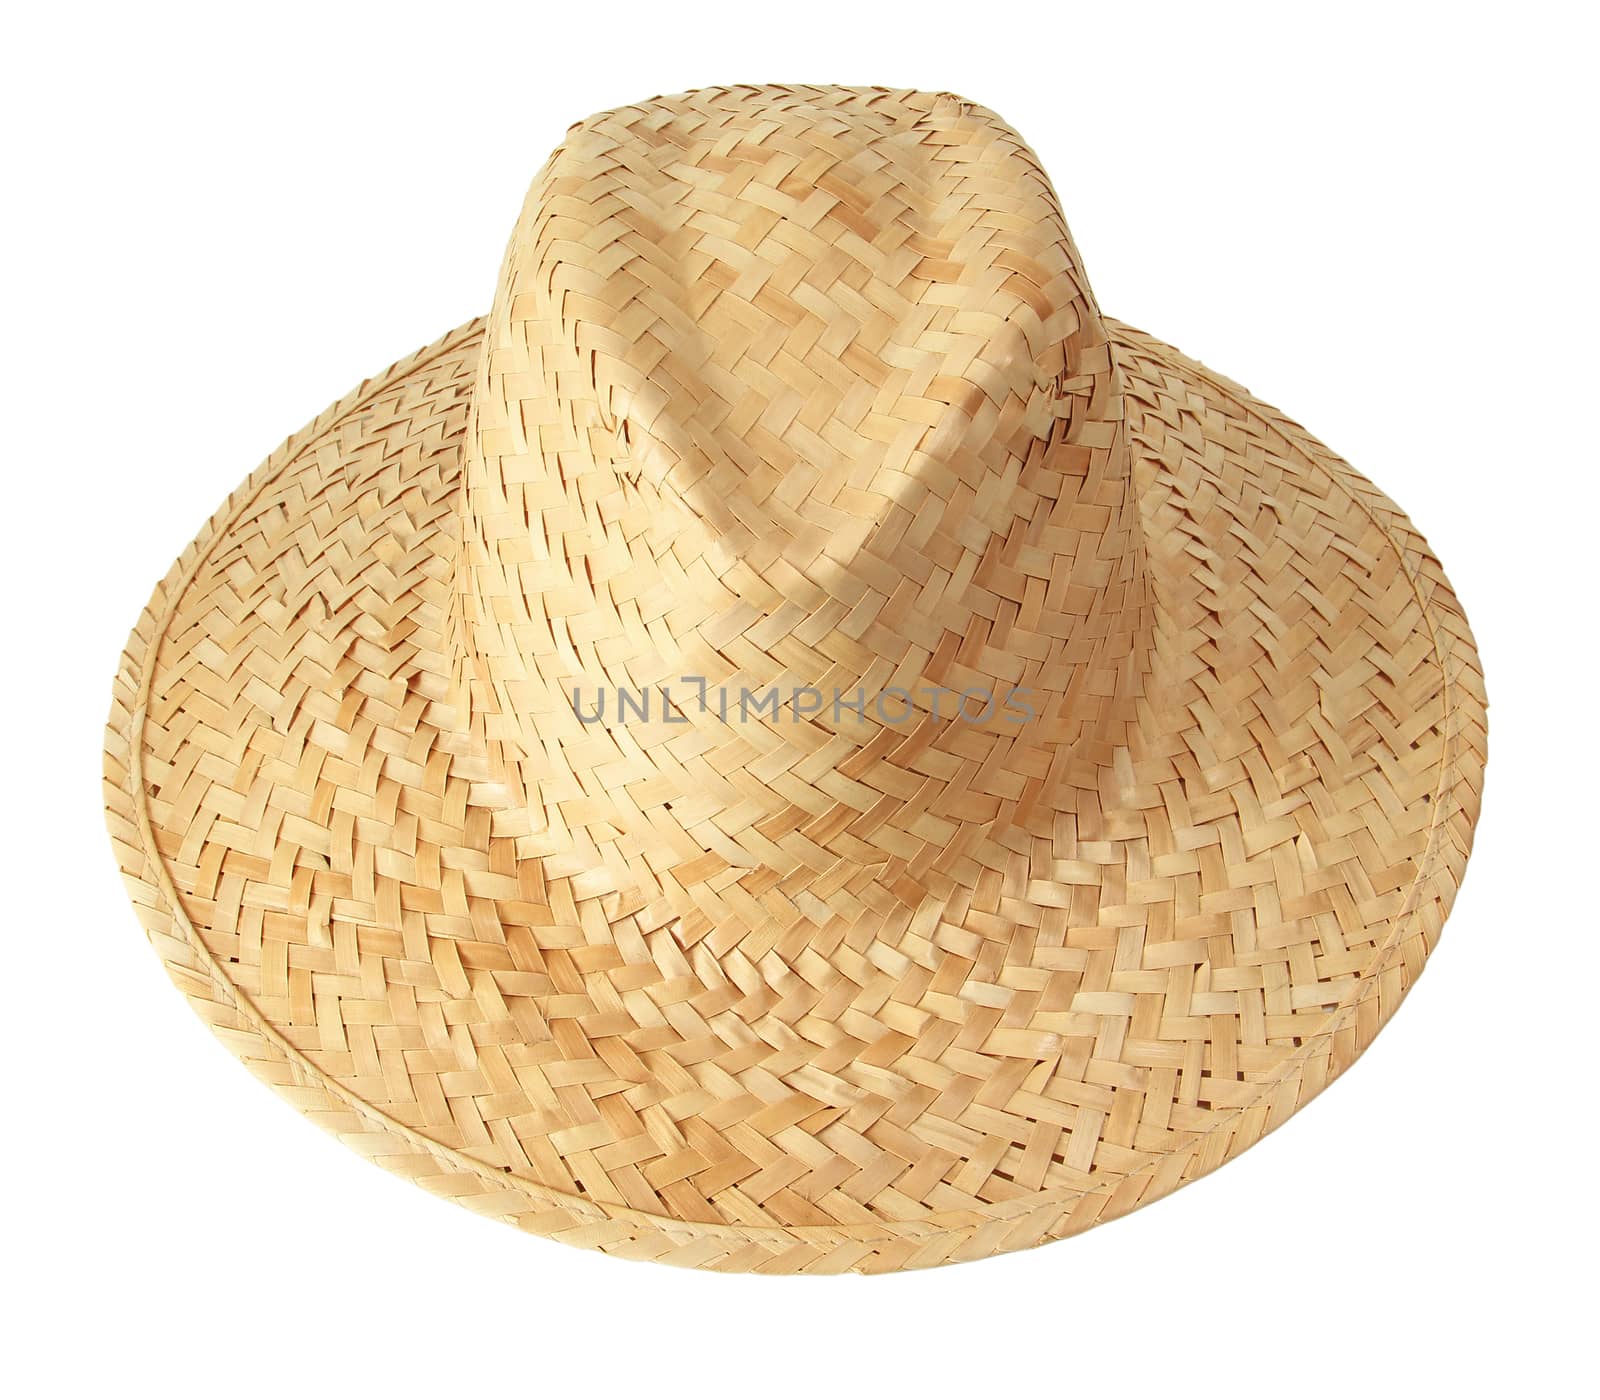 Straw hat isolated on white by foto76